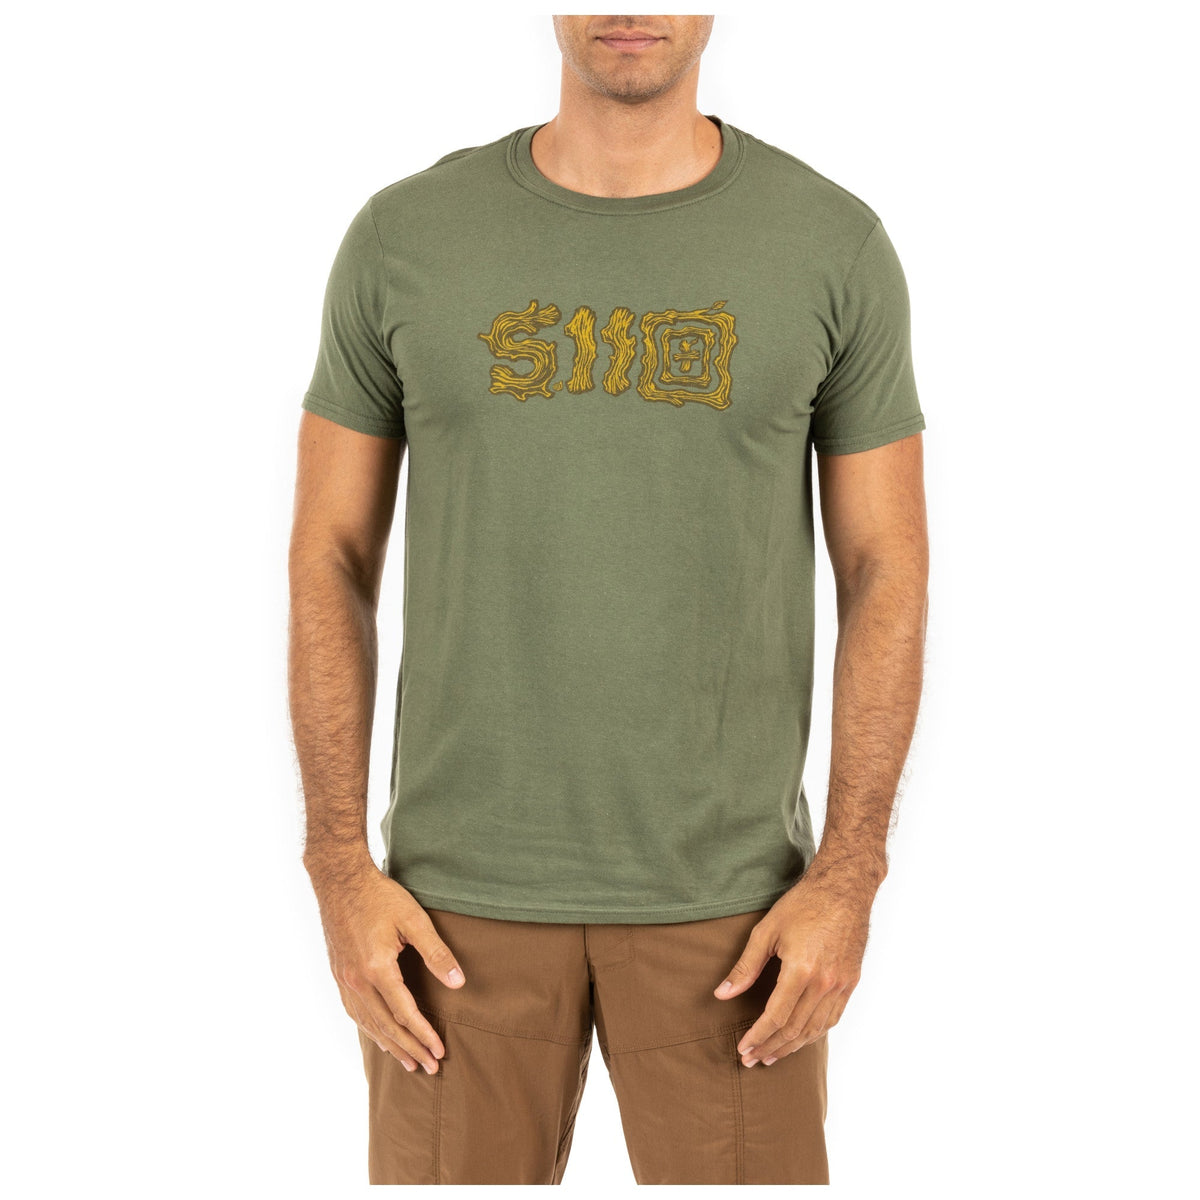 5.11 Tactical Sticks And Stones Tee Military Green Tees &amp; Tanks 5.11 Tactical Small Tactical Gear Supplier Tactical Distributors Australia